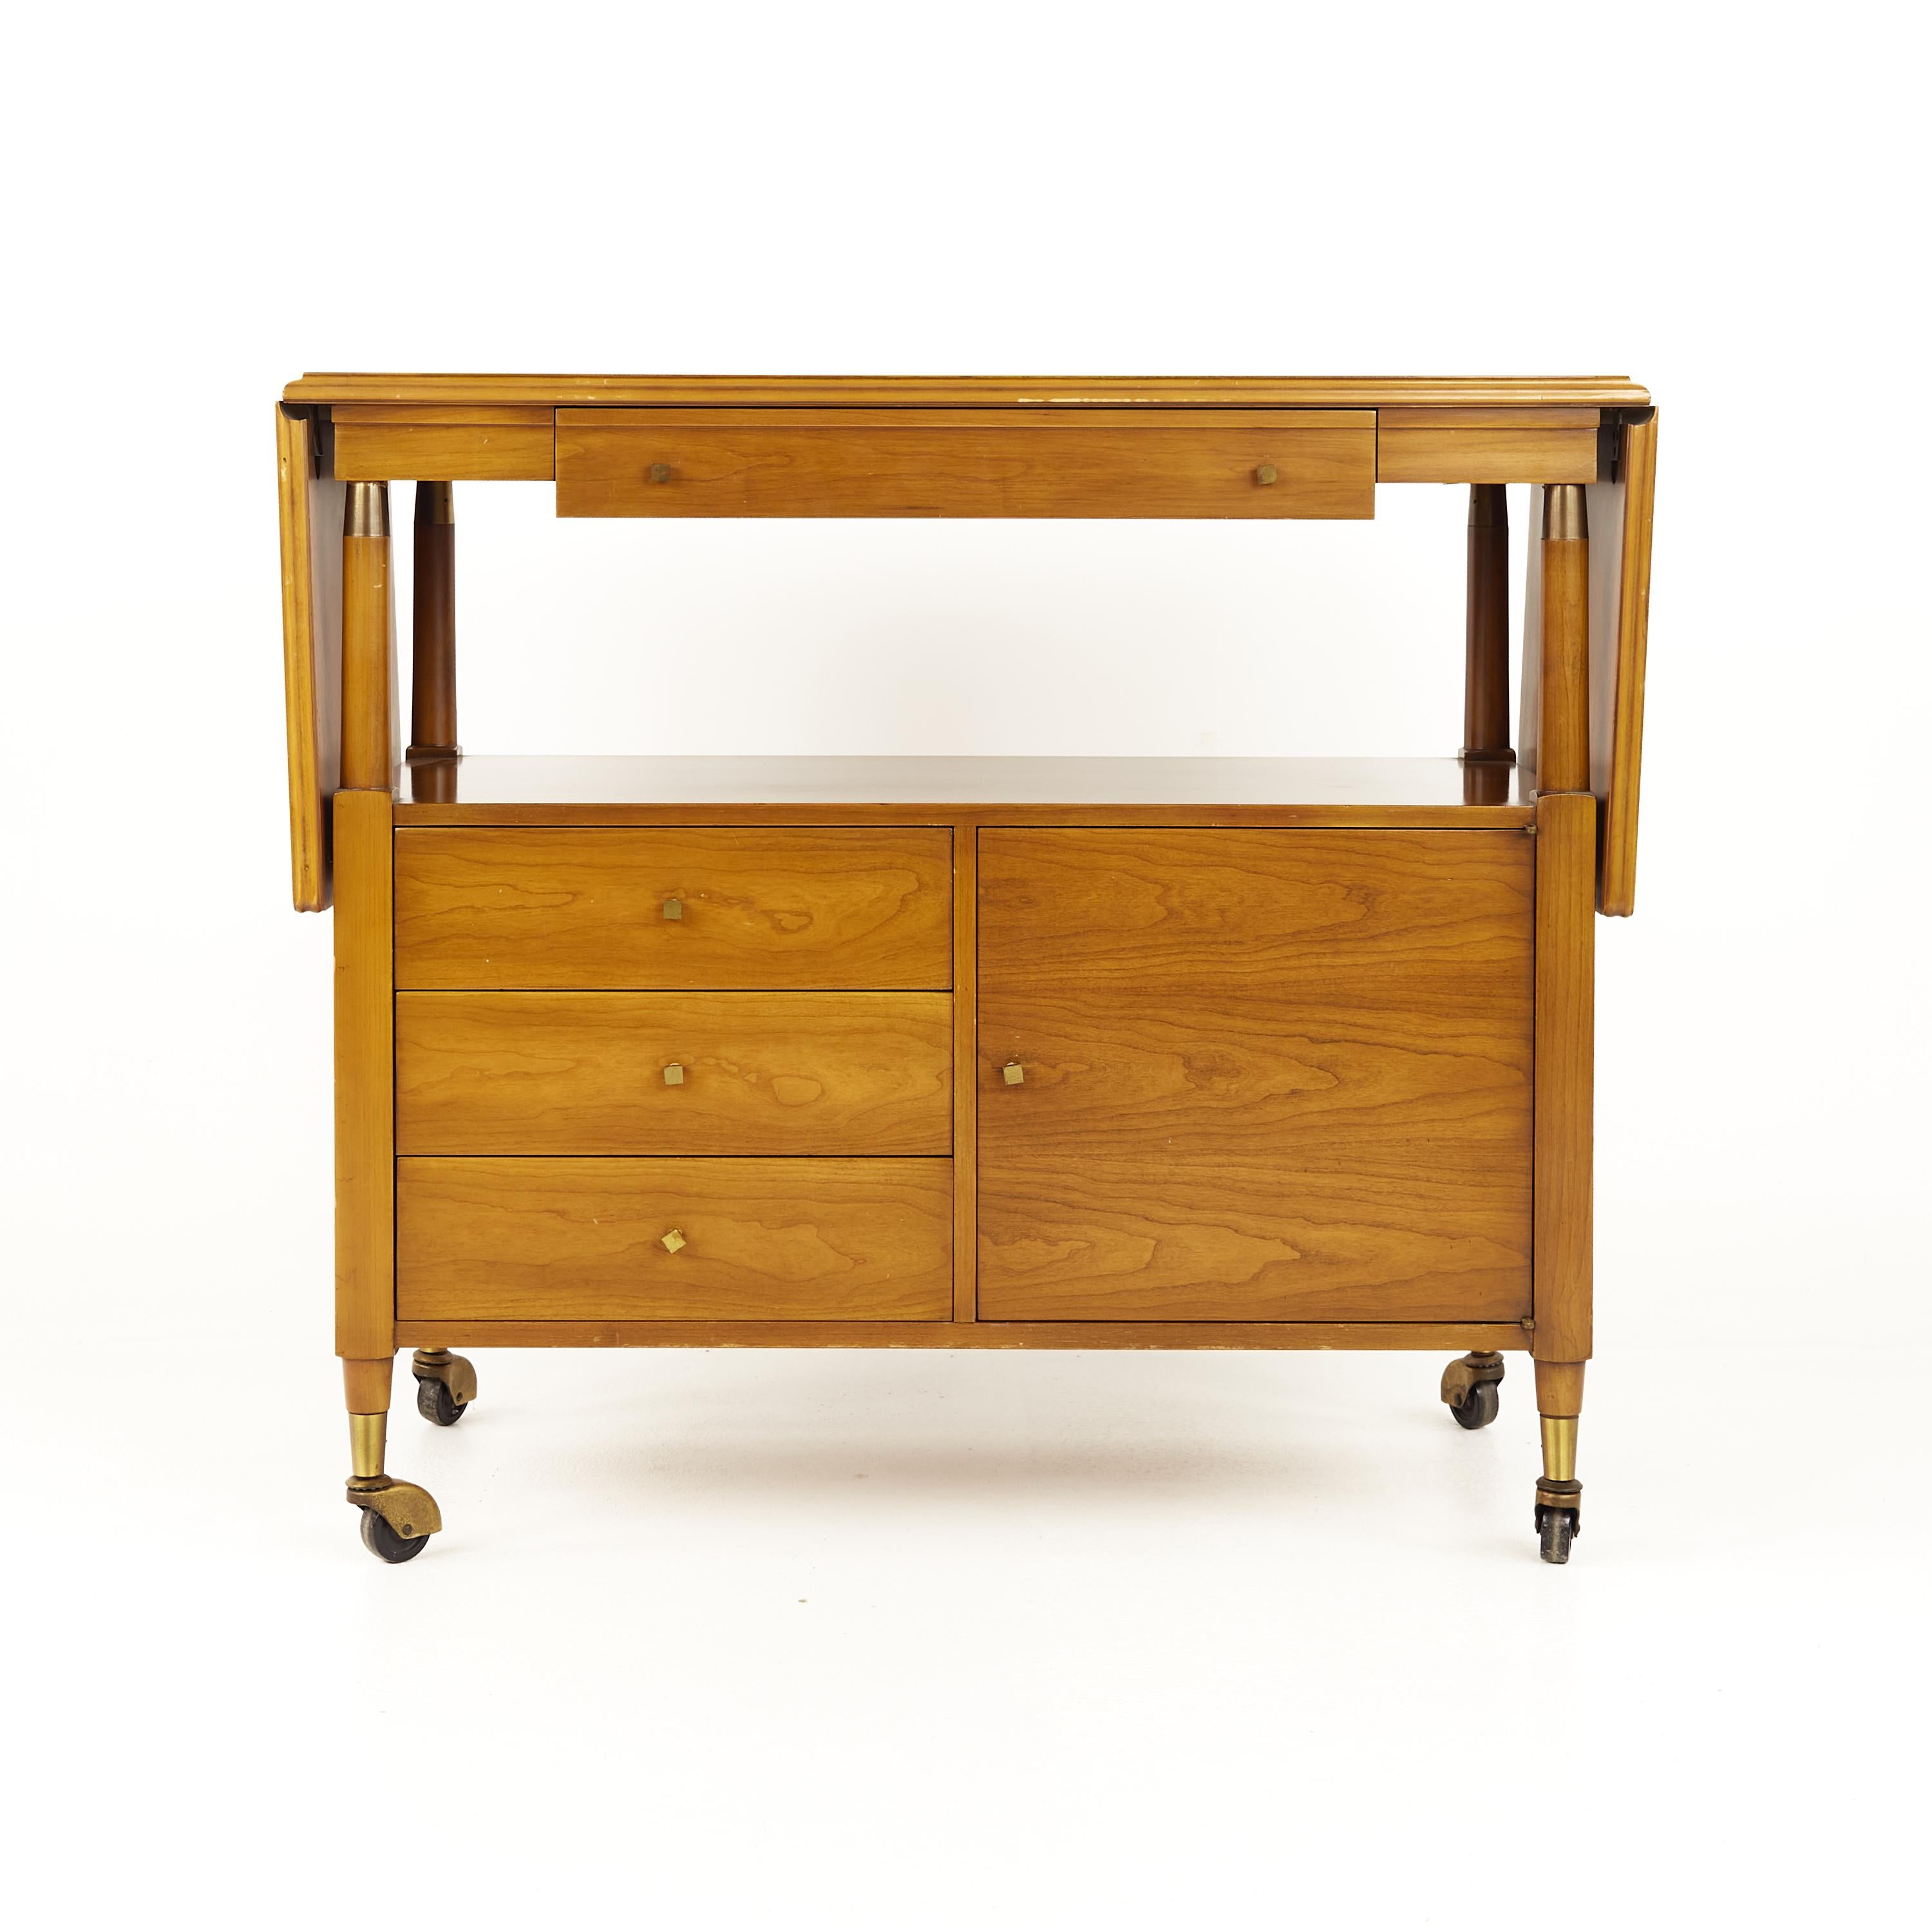 John Widdicomb mid century bar cart

This cart measures 38 wide x 18 deep x 33 inches high, and when open 64.5 inches wide

All pieces of furniture can be had in what we call restored vintage condition. That means the piece is restored upon